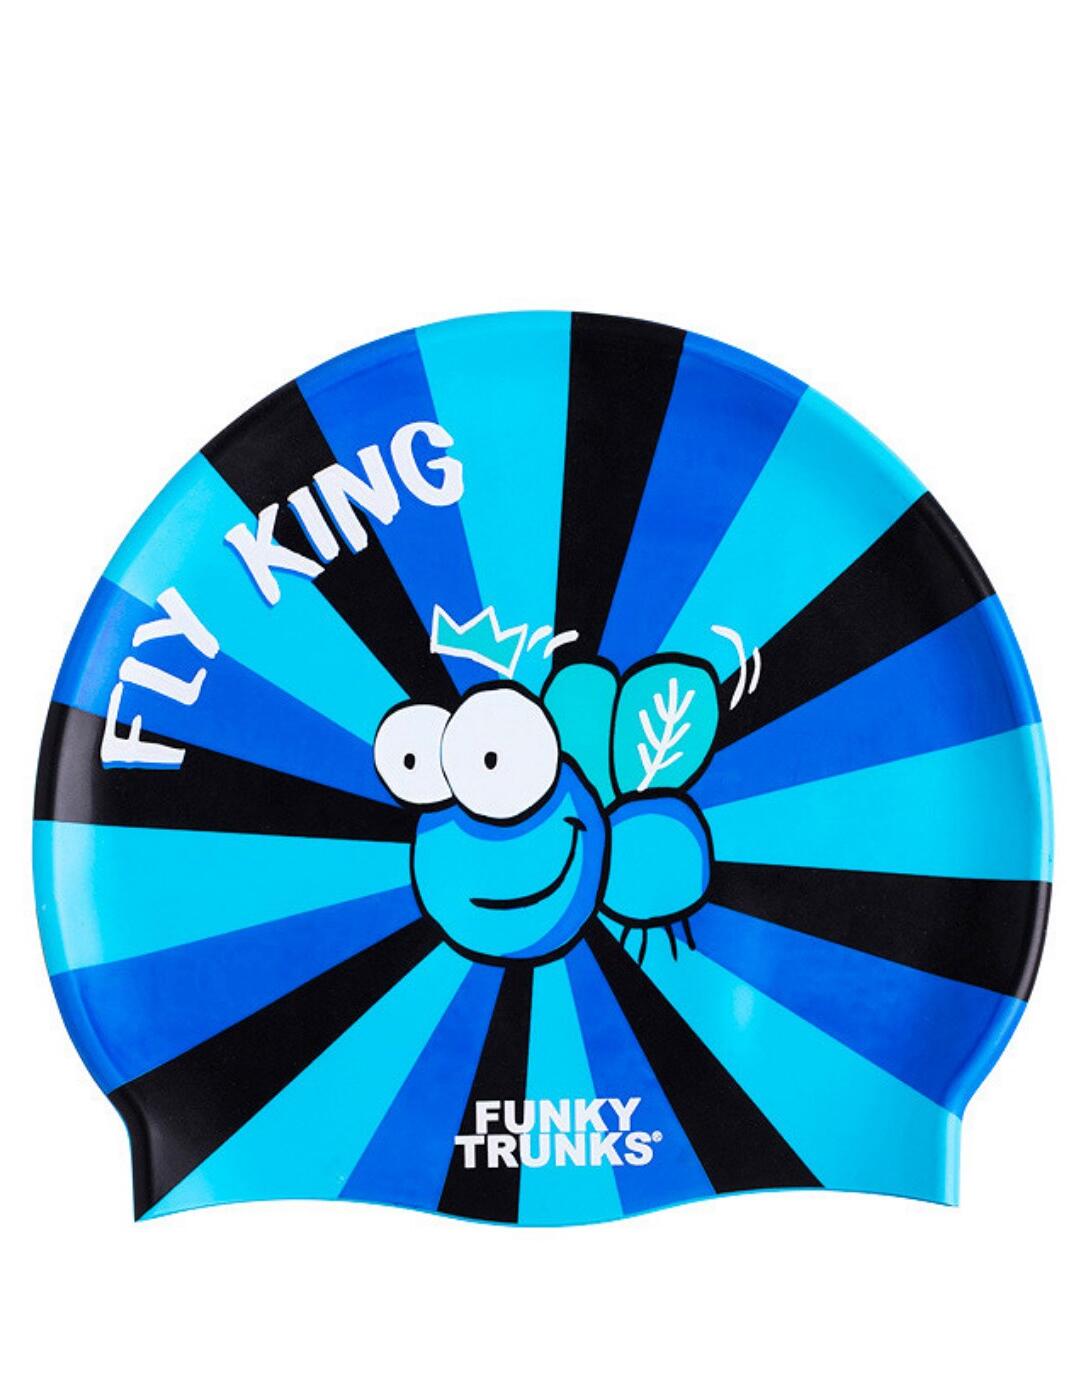 FT9901172 Funky Trunks Silicone Swimming Cap - FT9901172 Fly King